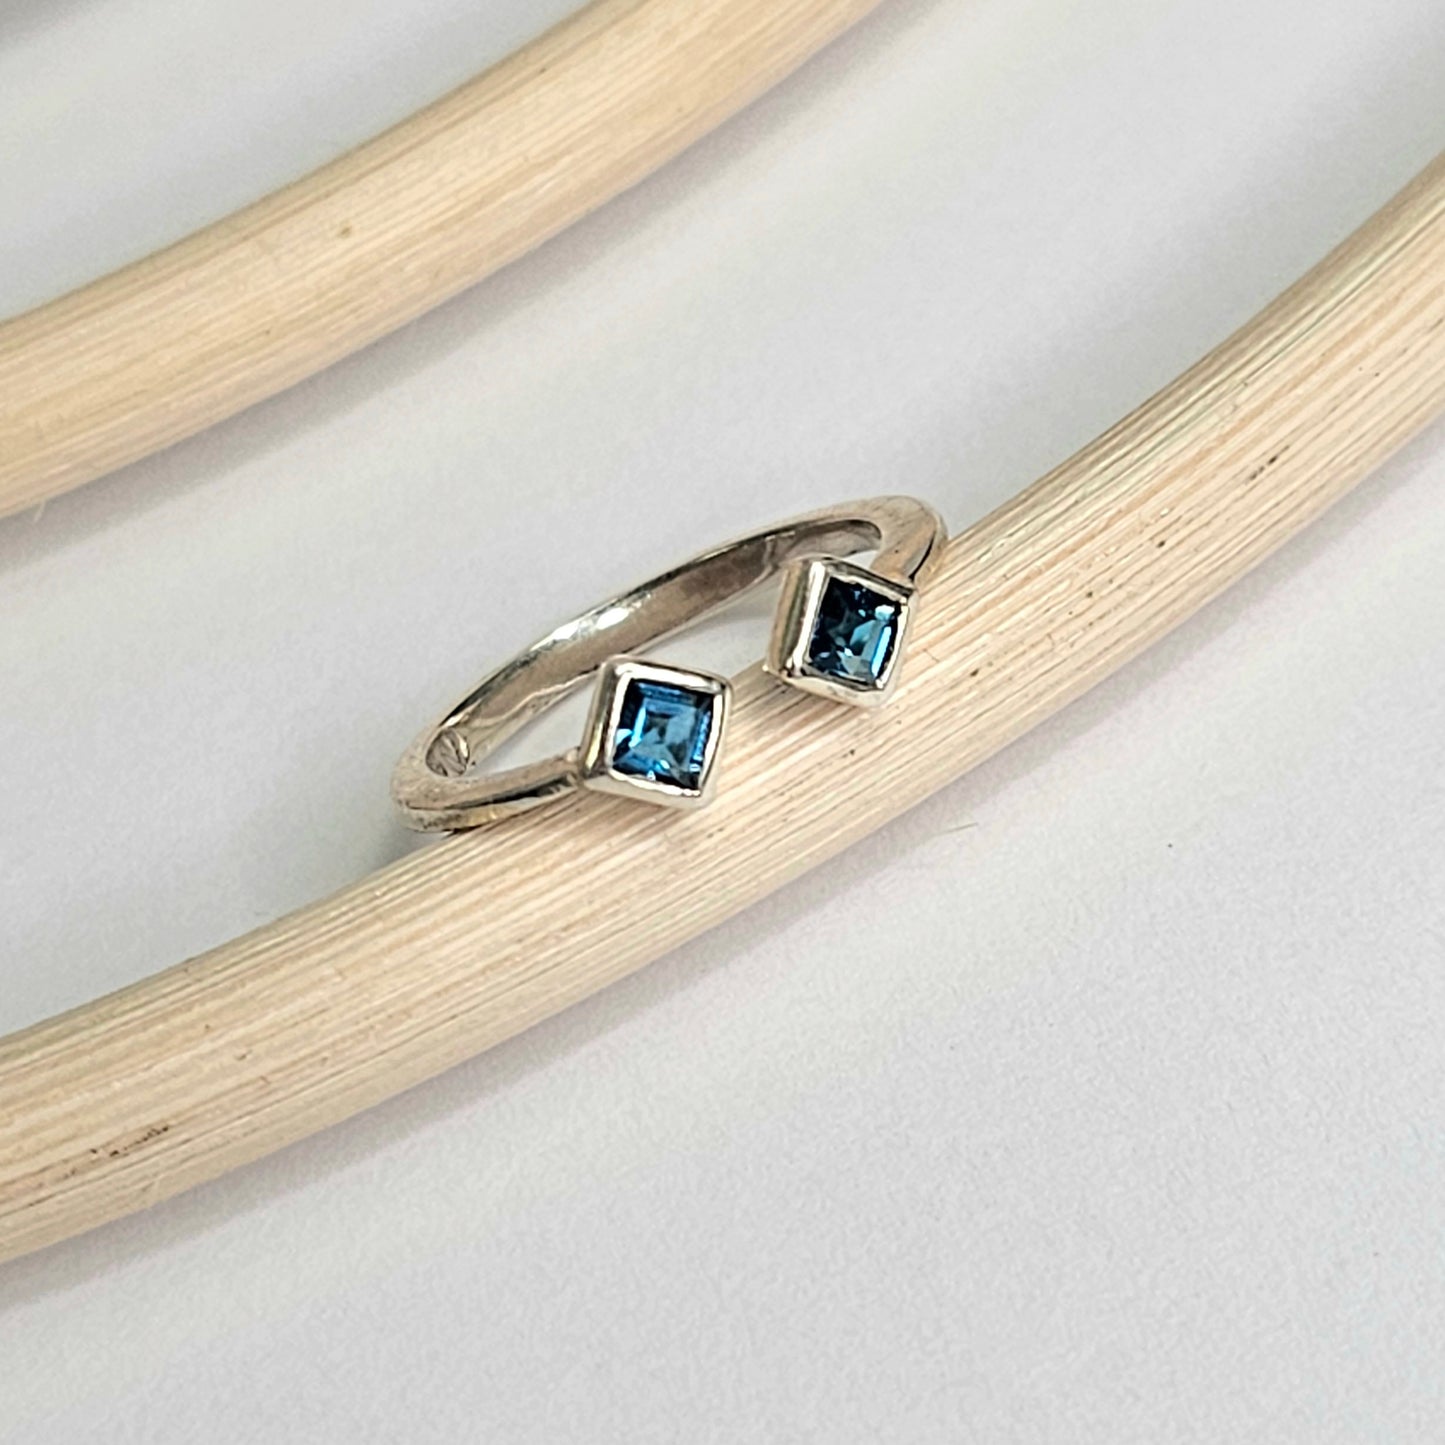 Blue Topaz Midi Ring - Solid Sterling Silverp o